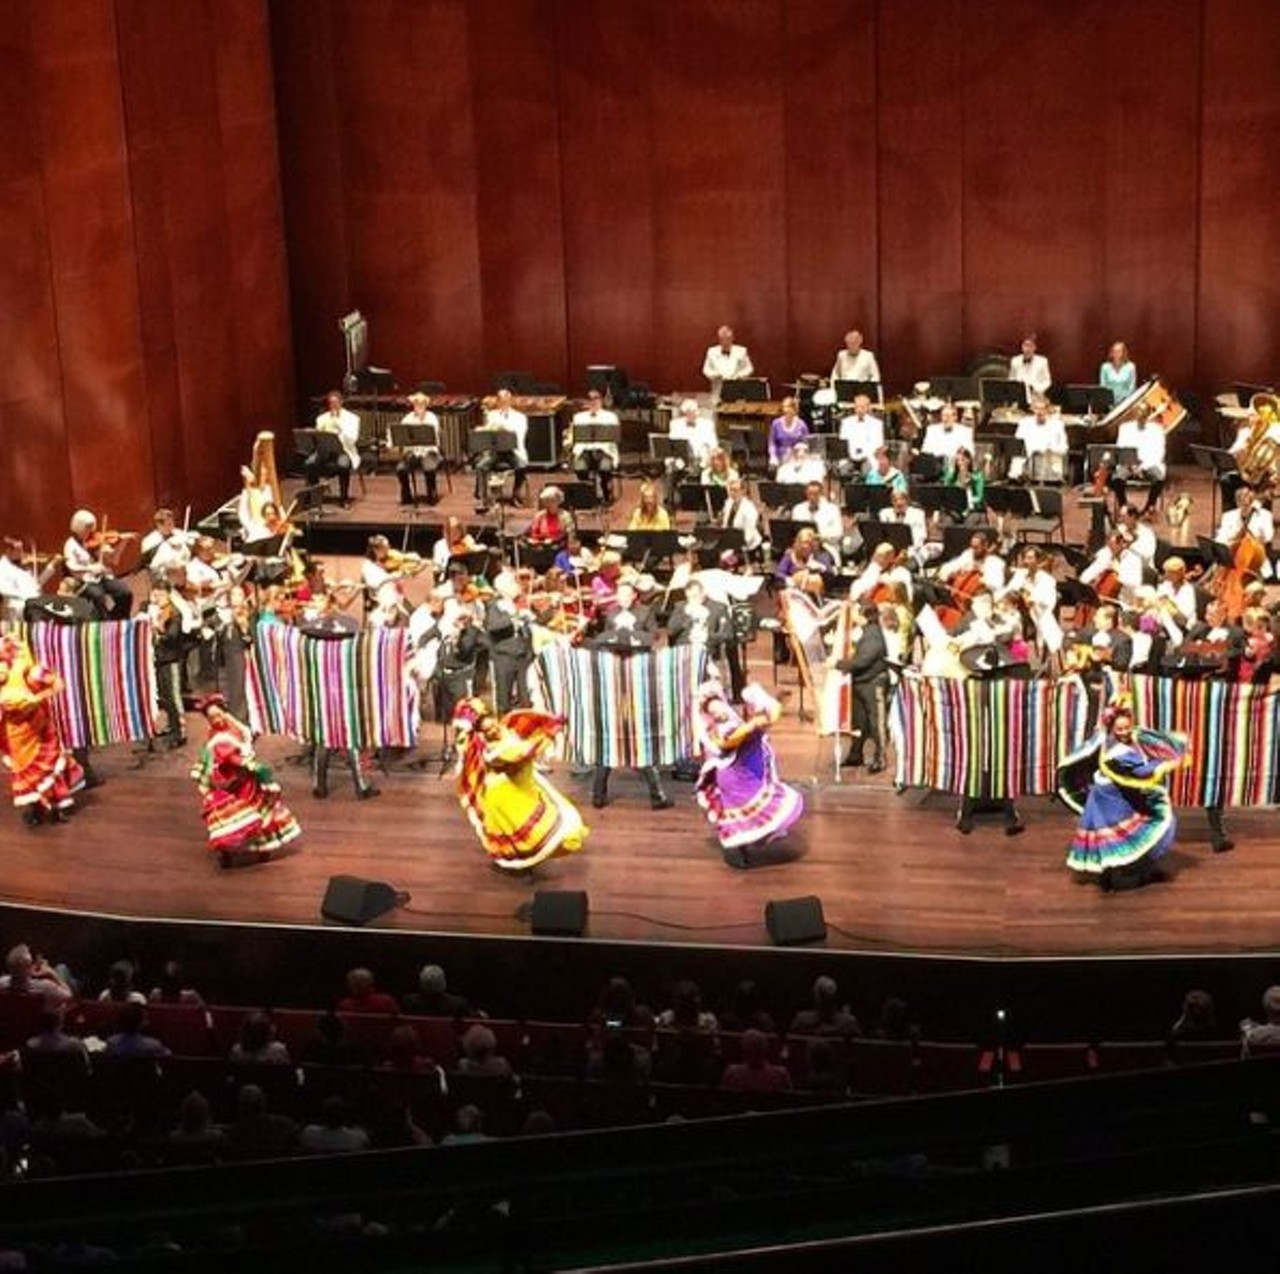 Fiesta Pops
8 p.m. April 21-22 at Tobin Center for the Performing Arts
Spend an evening surrounded by Mexican and Latin American music, dance and culture by local talent. Campanas de America offer the Latin sounds while a group from the Guadalupe Dance Company provide the sights, a combination that feels just like Fiesta.
Photo via Instagram, moderntejana